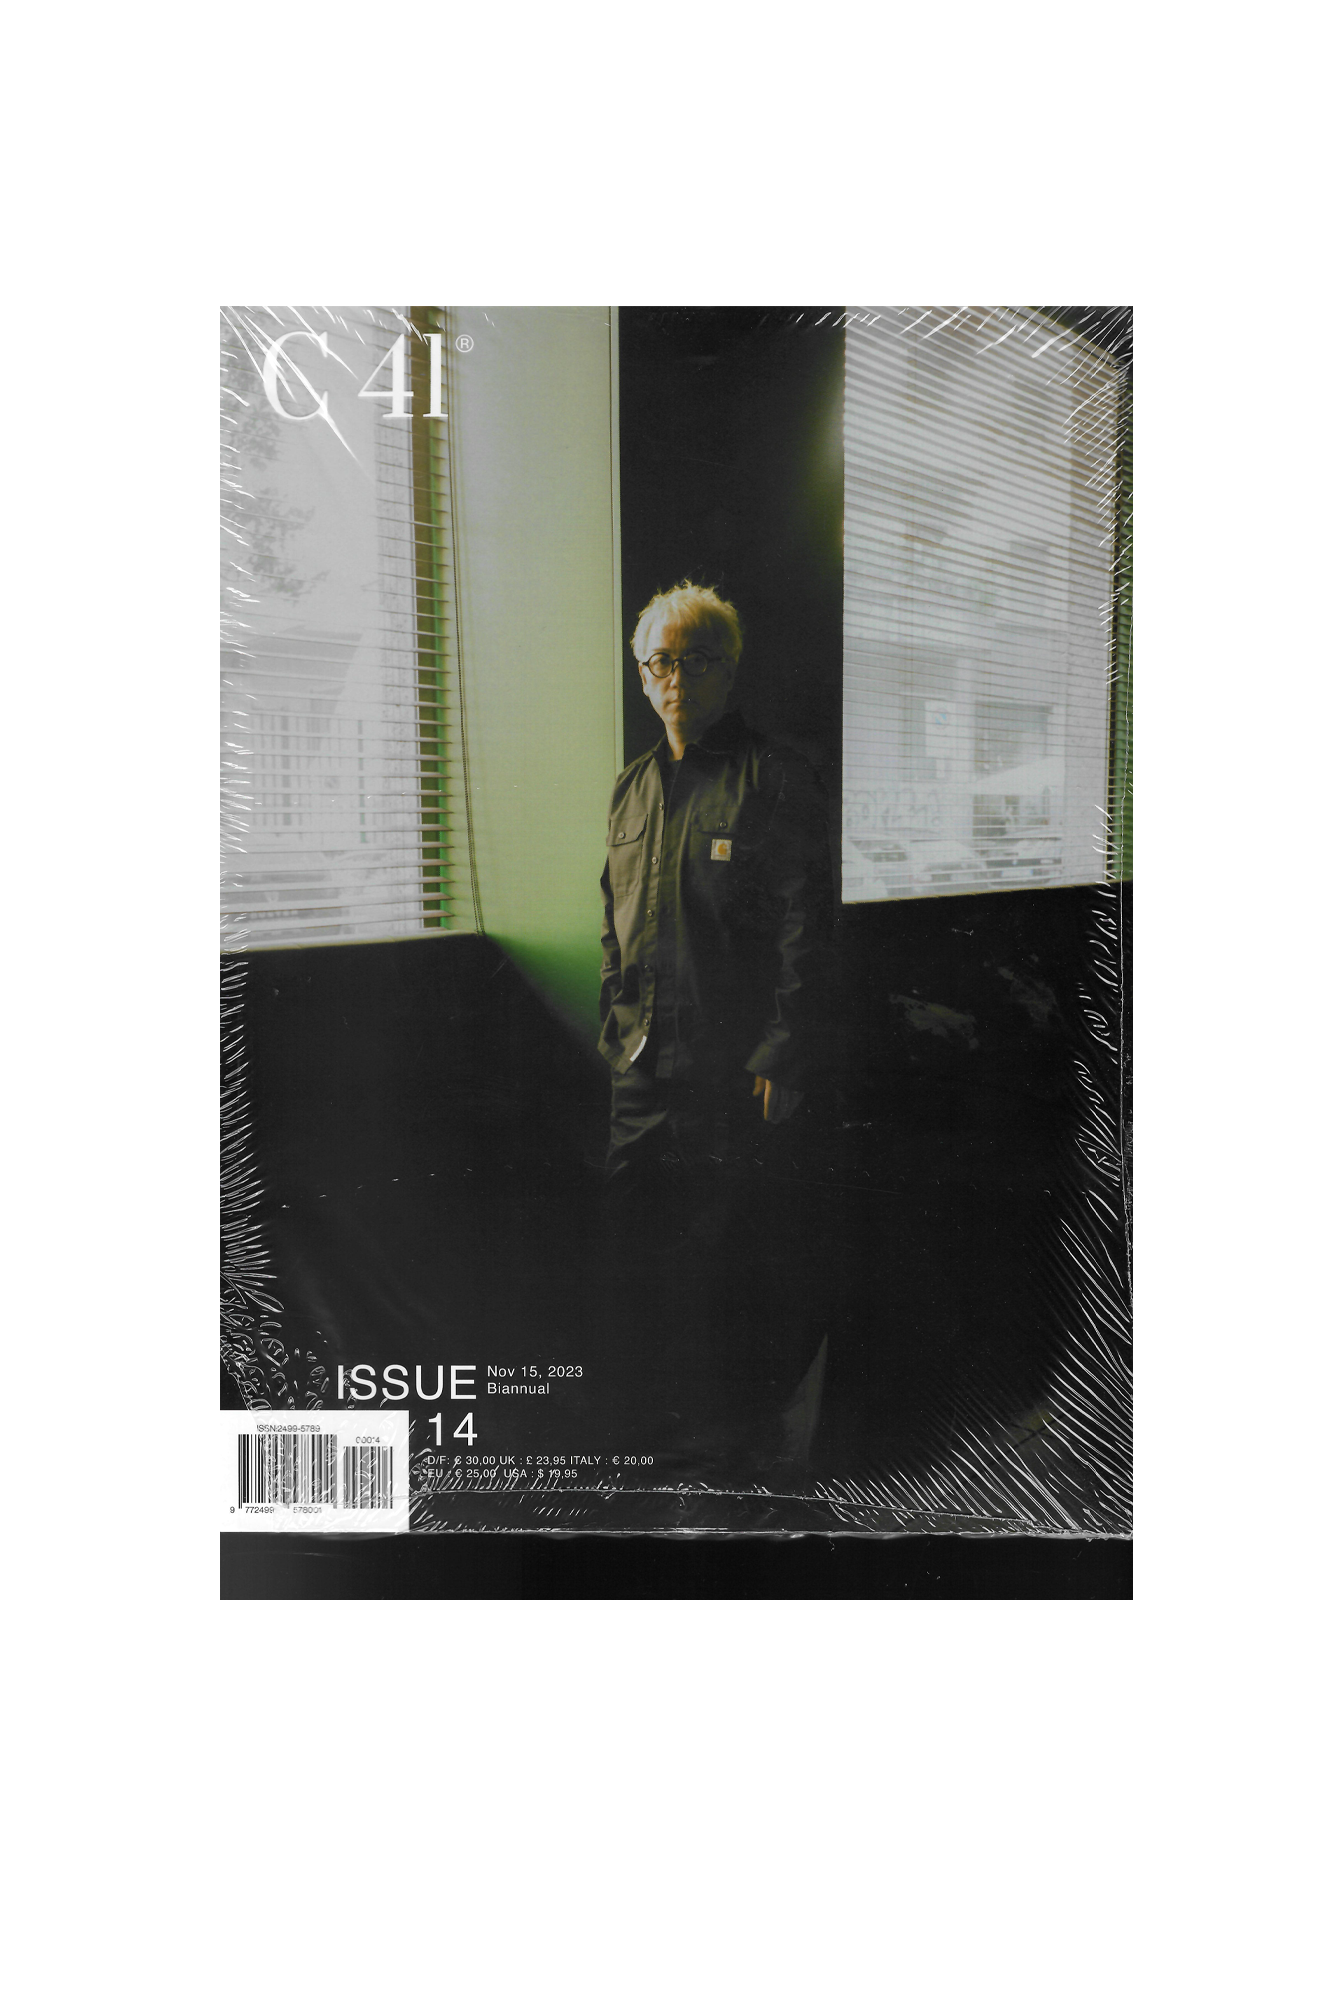 Issue 14 "New Fiction"